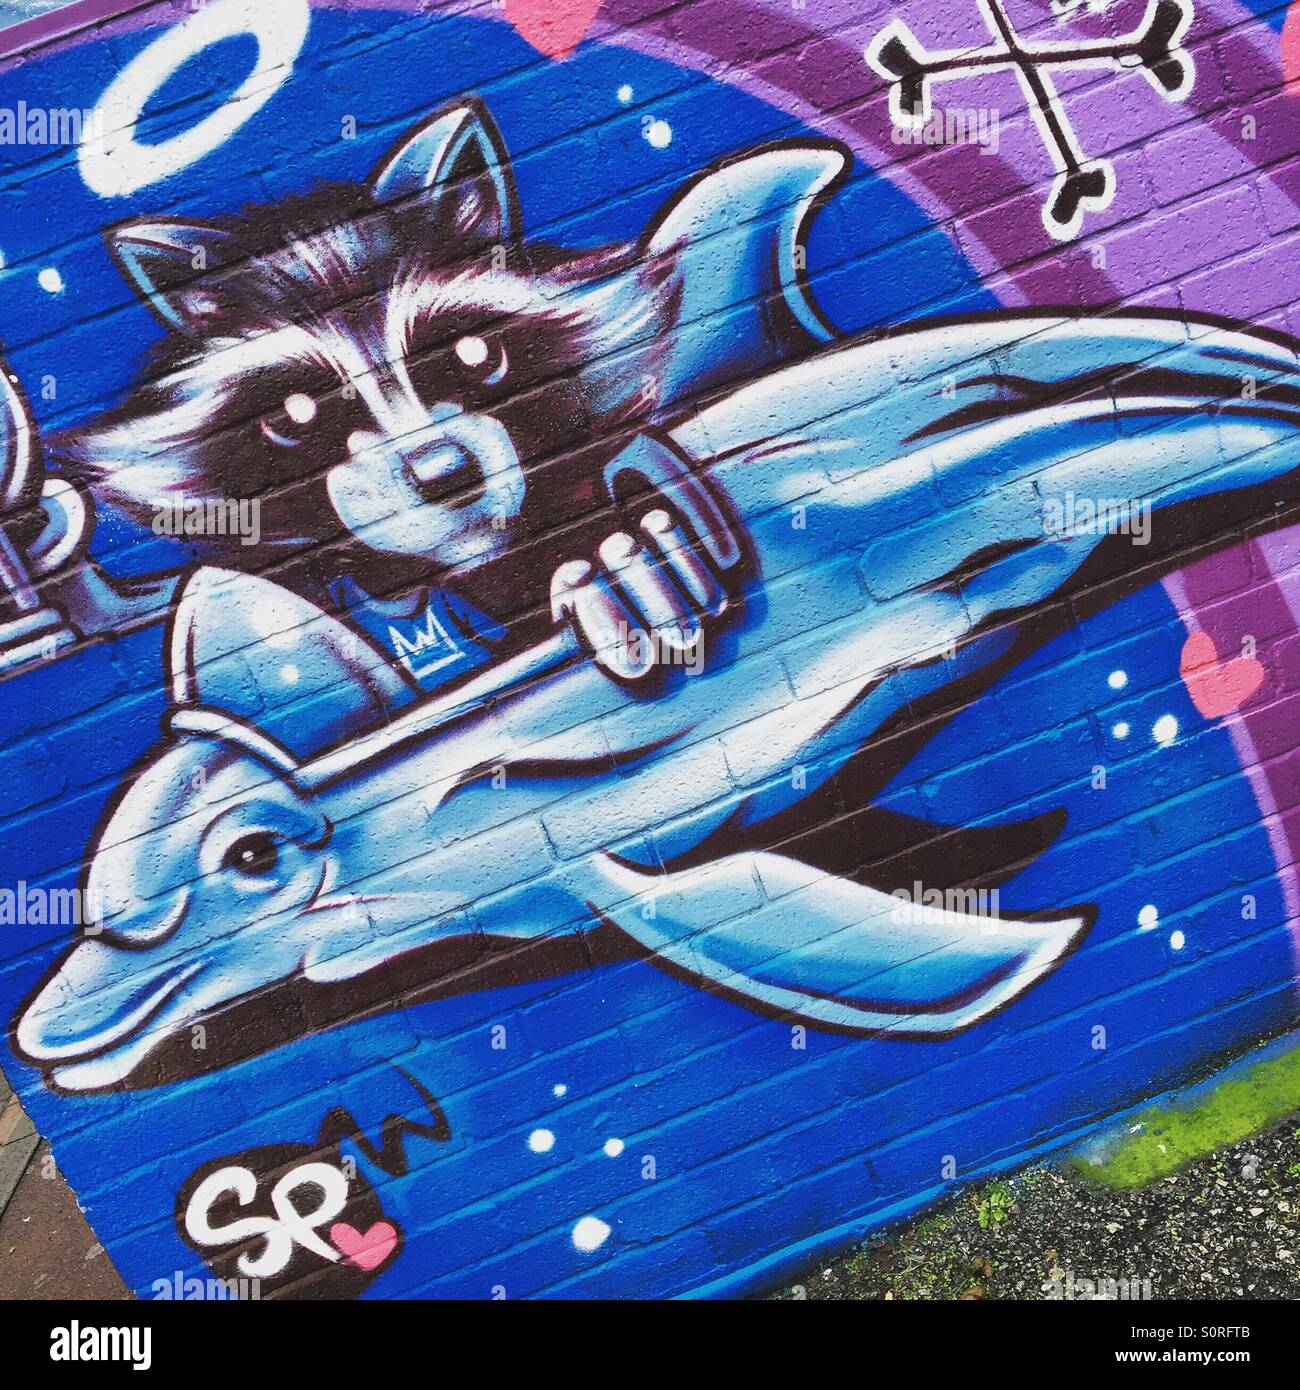 Dolphin and raccoon wall art in the street Stock Photo